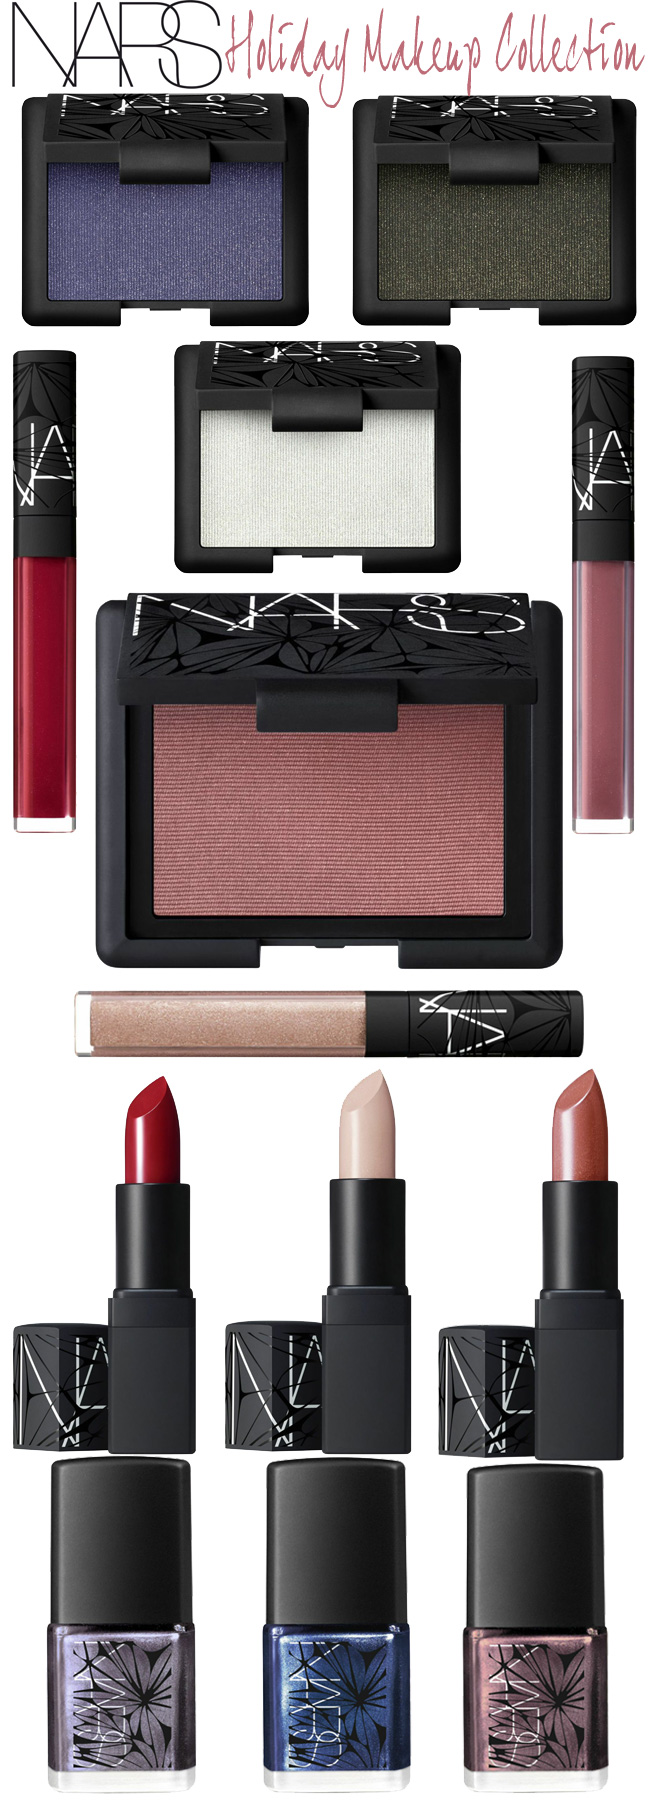 NARS Laced with Edge Holiday Color Collection